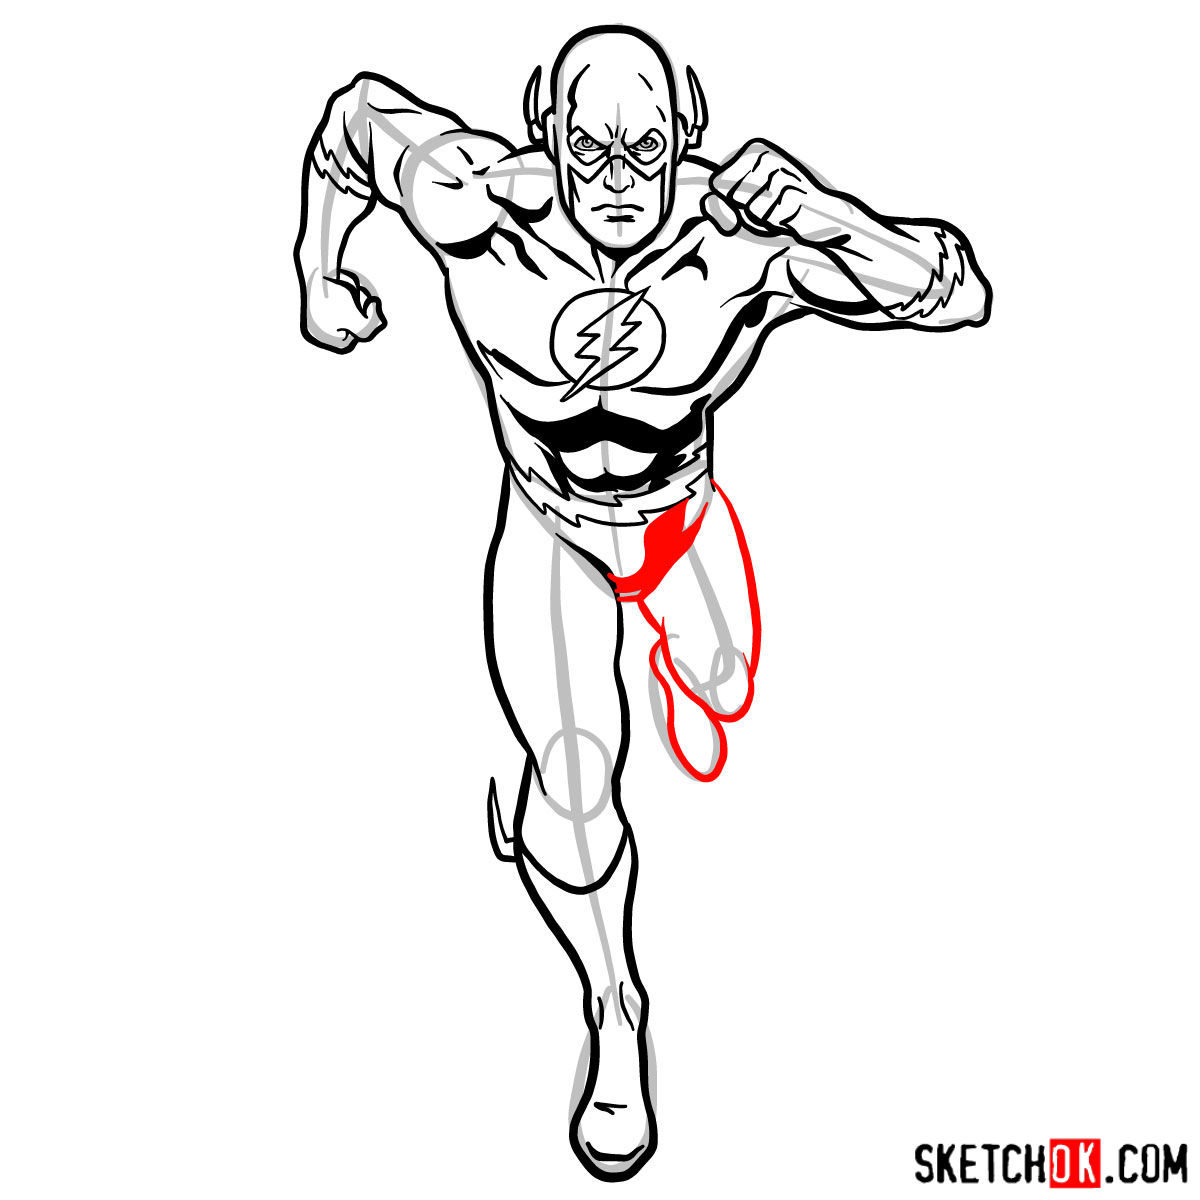 How to draw Flash (Barry Allen) - step 10